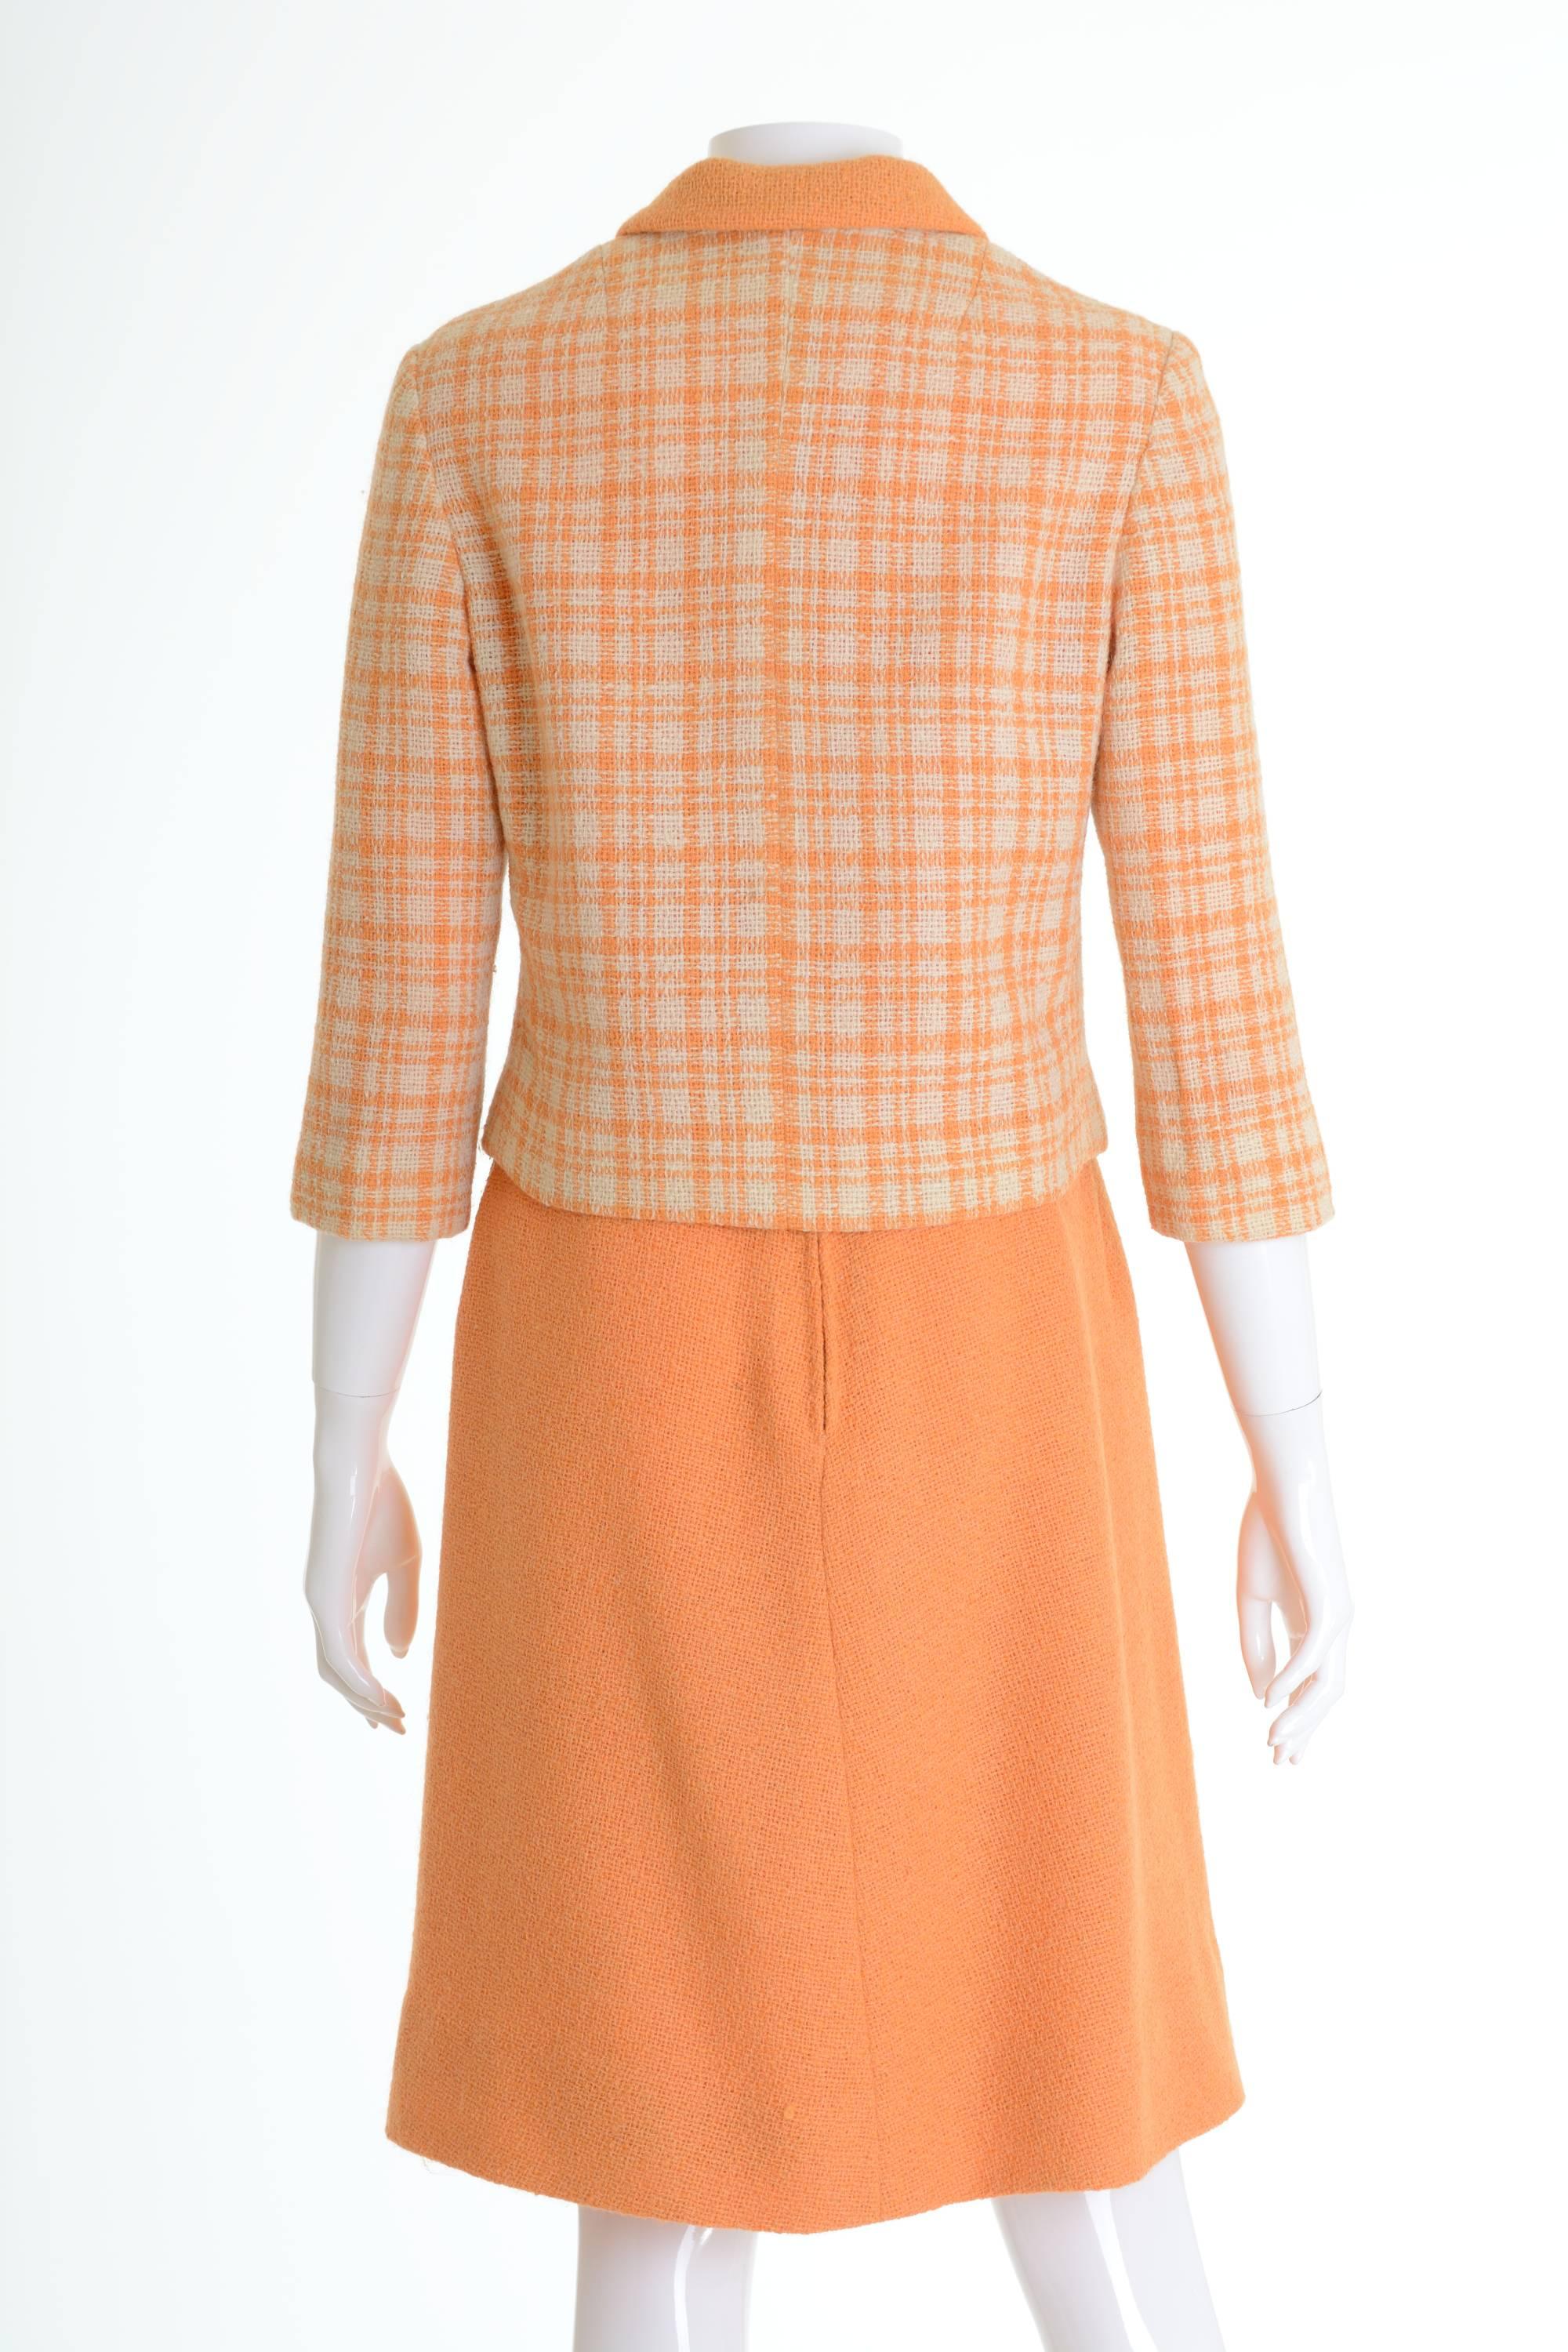 This lovely 1960s suit set by Italian couturier Sorelle Fontana is in orange and cream plaid printed woolen fabric. The jacket has plastic buttons closure, 3/4 sleeves and is fully lined. The skirt has back zip closure and is lined. 

Very good